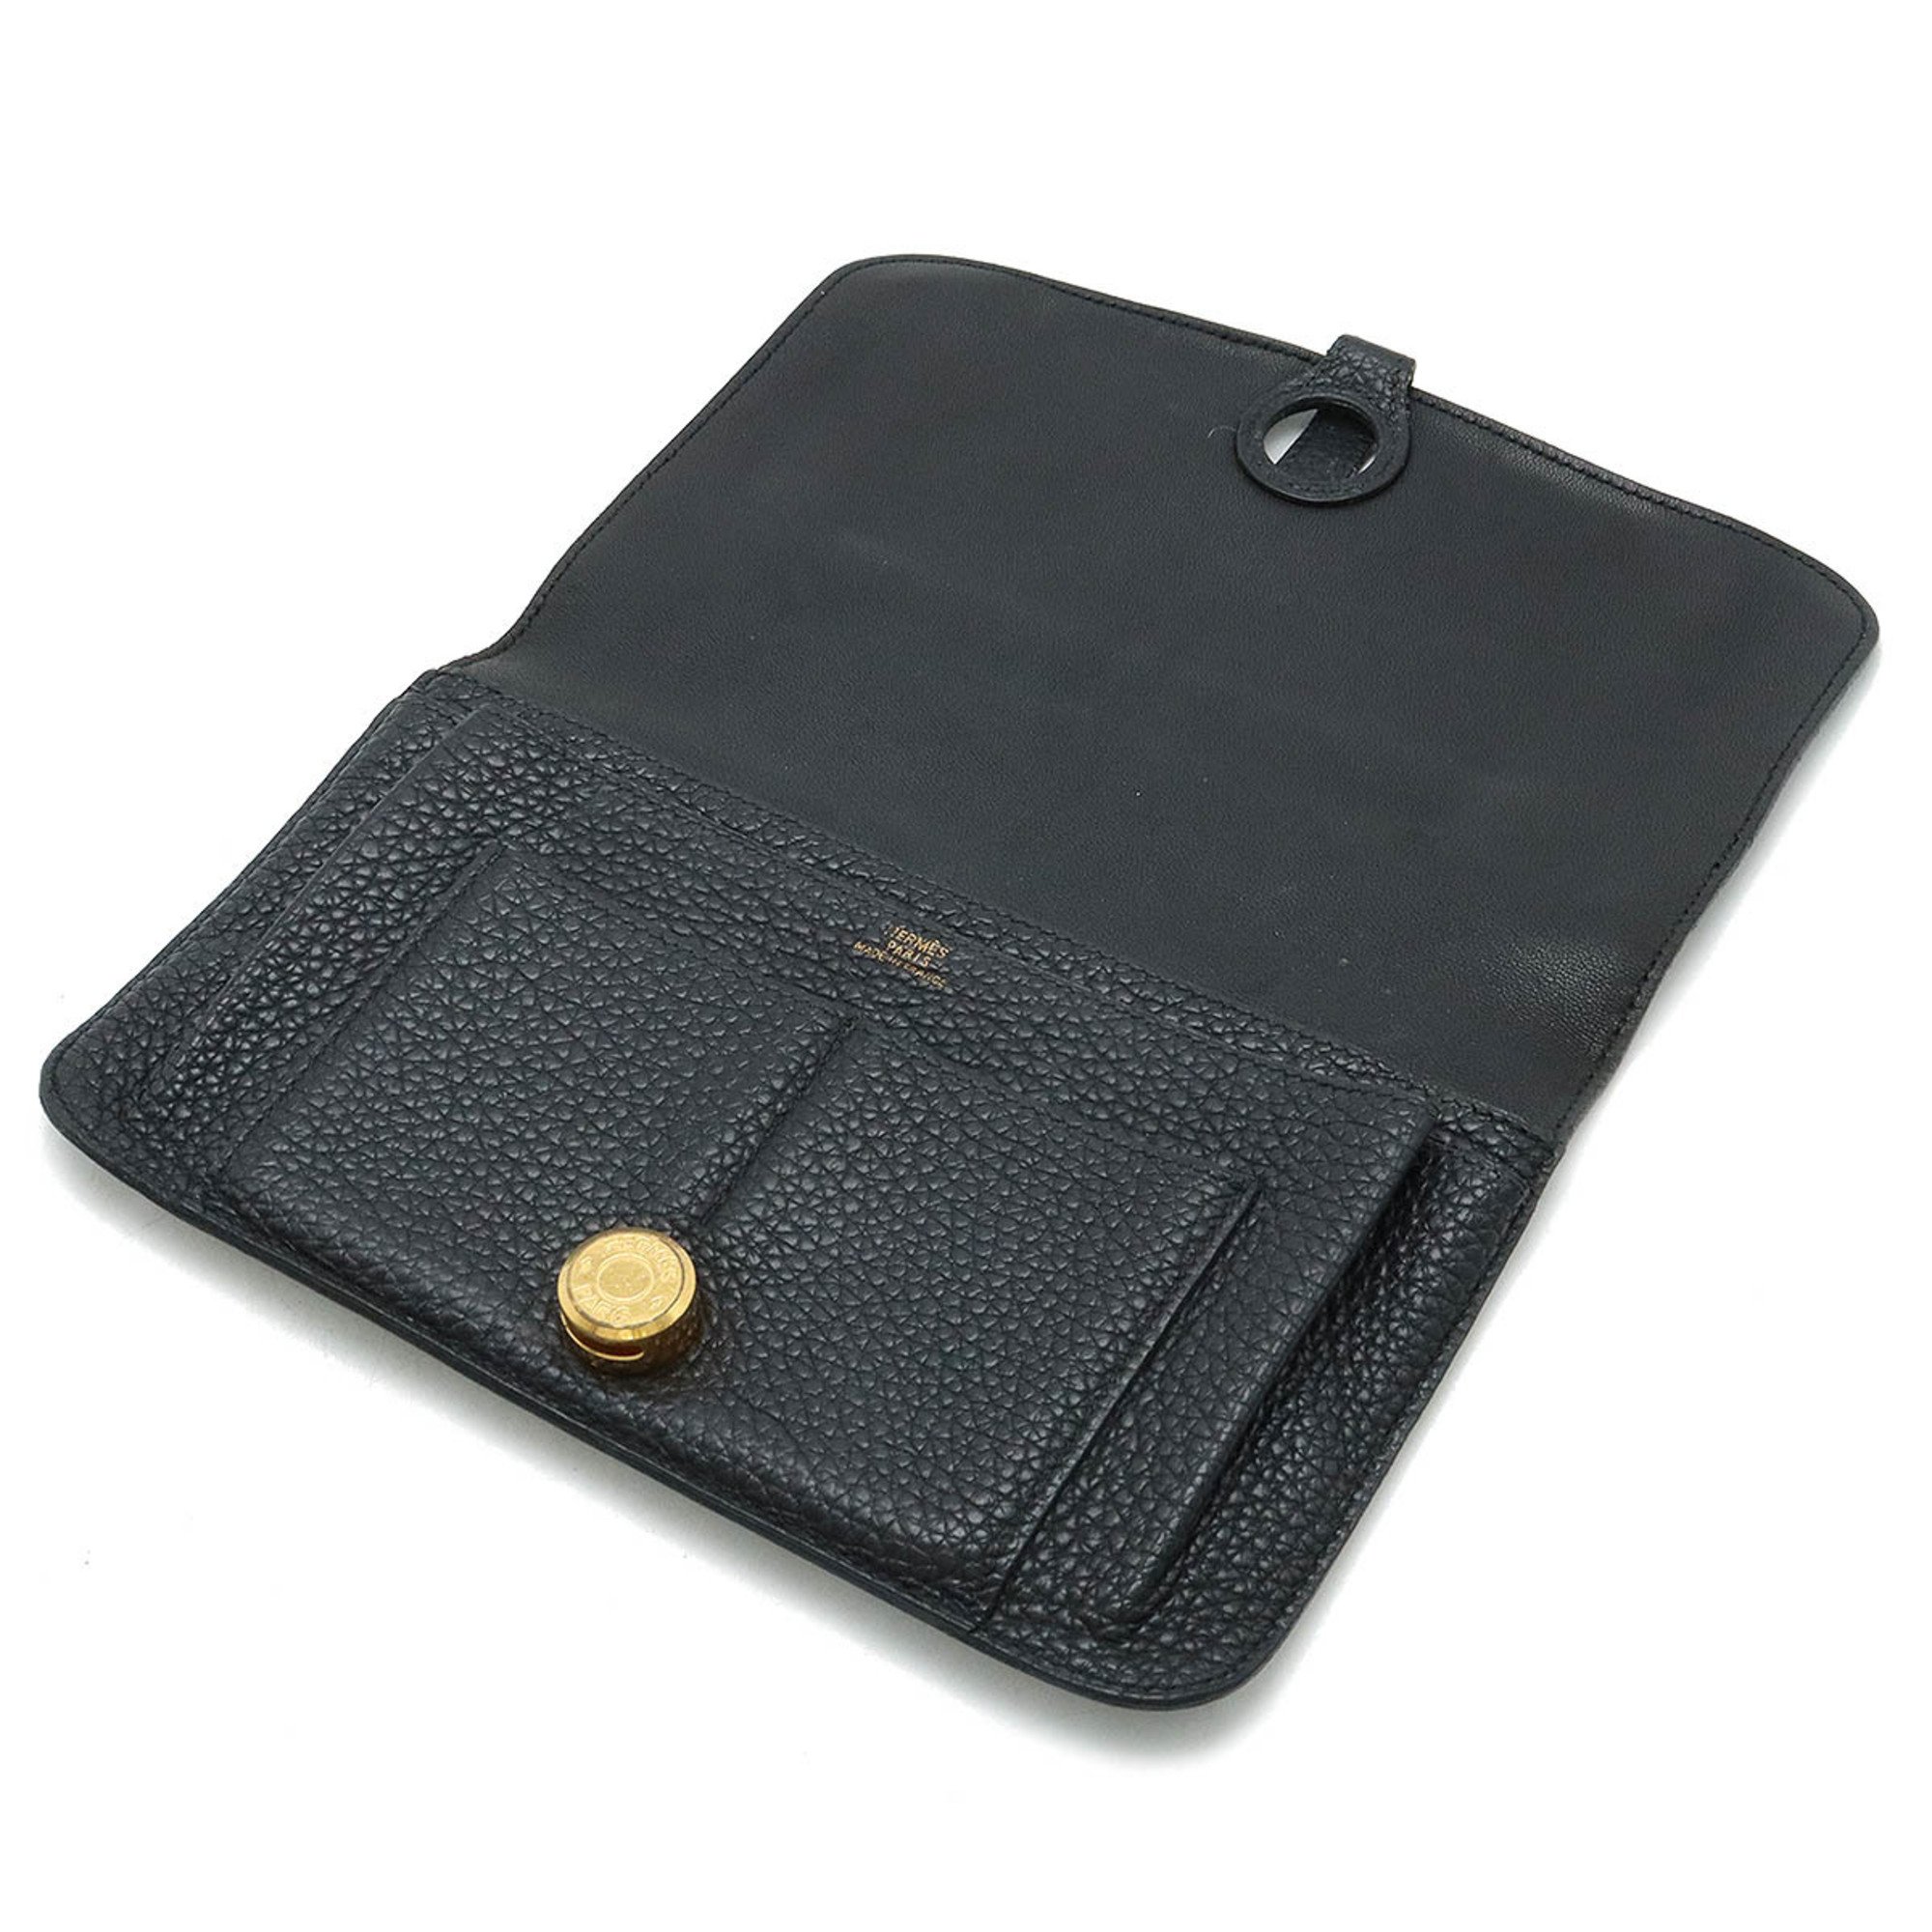 HERMES Dogon Duo GM Bi-fold long wallet Taurillon Clemence leather Black Coin